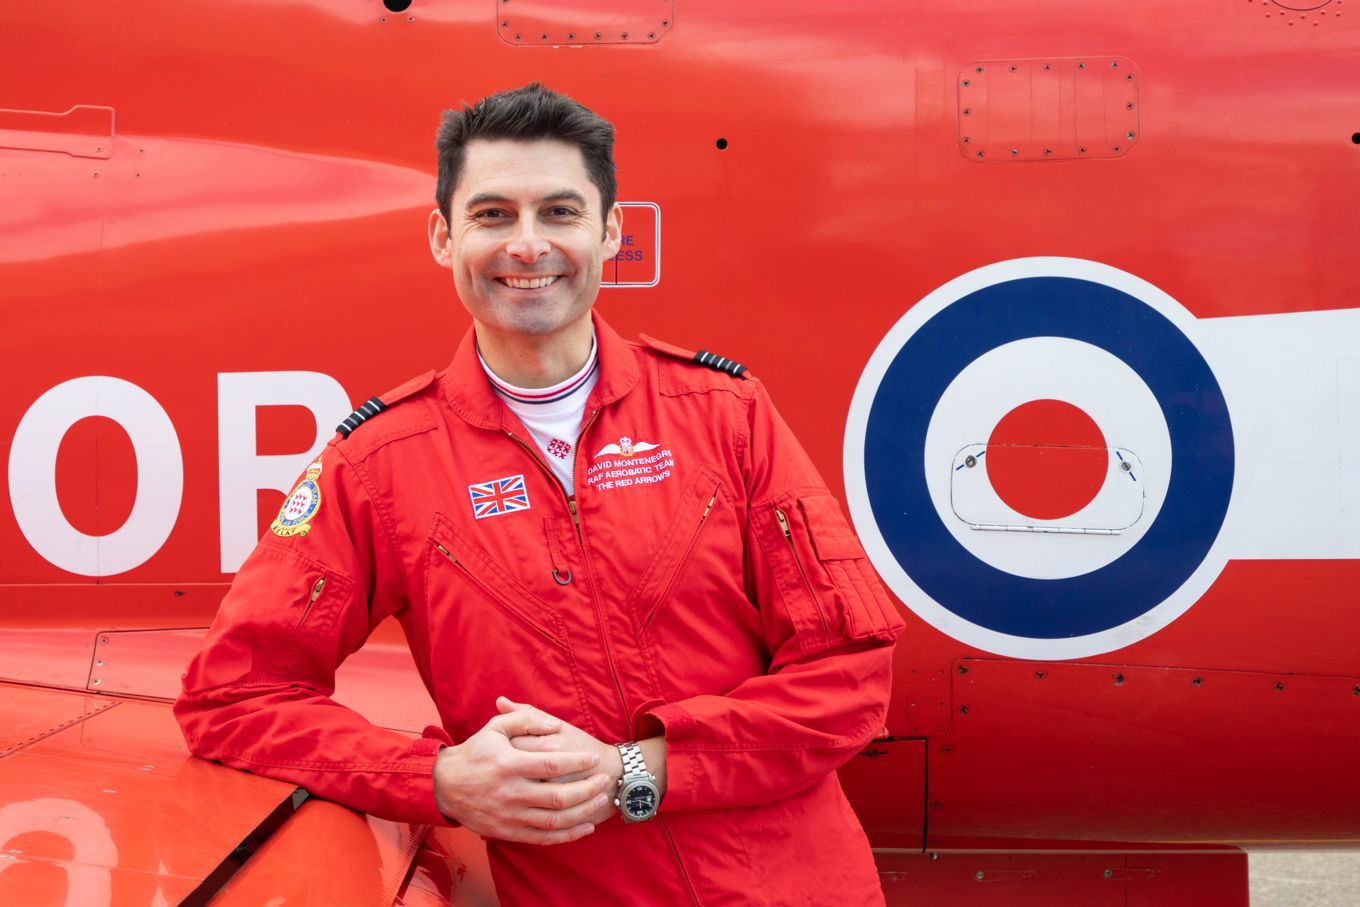 Wing Commander David Montenegro is the new Officer Commanding, Royal Air Force Aerobatic Team.